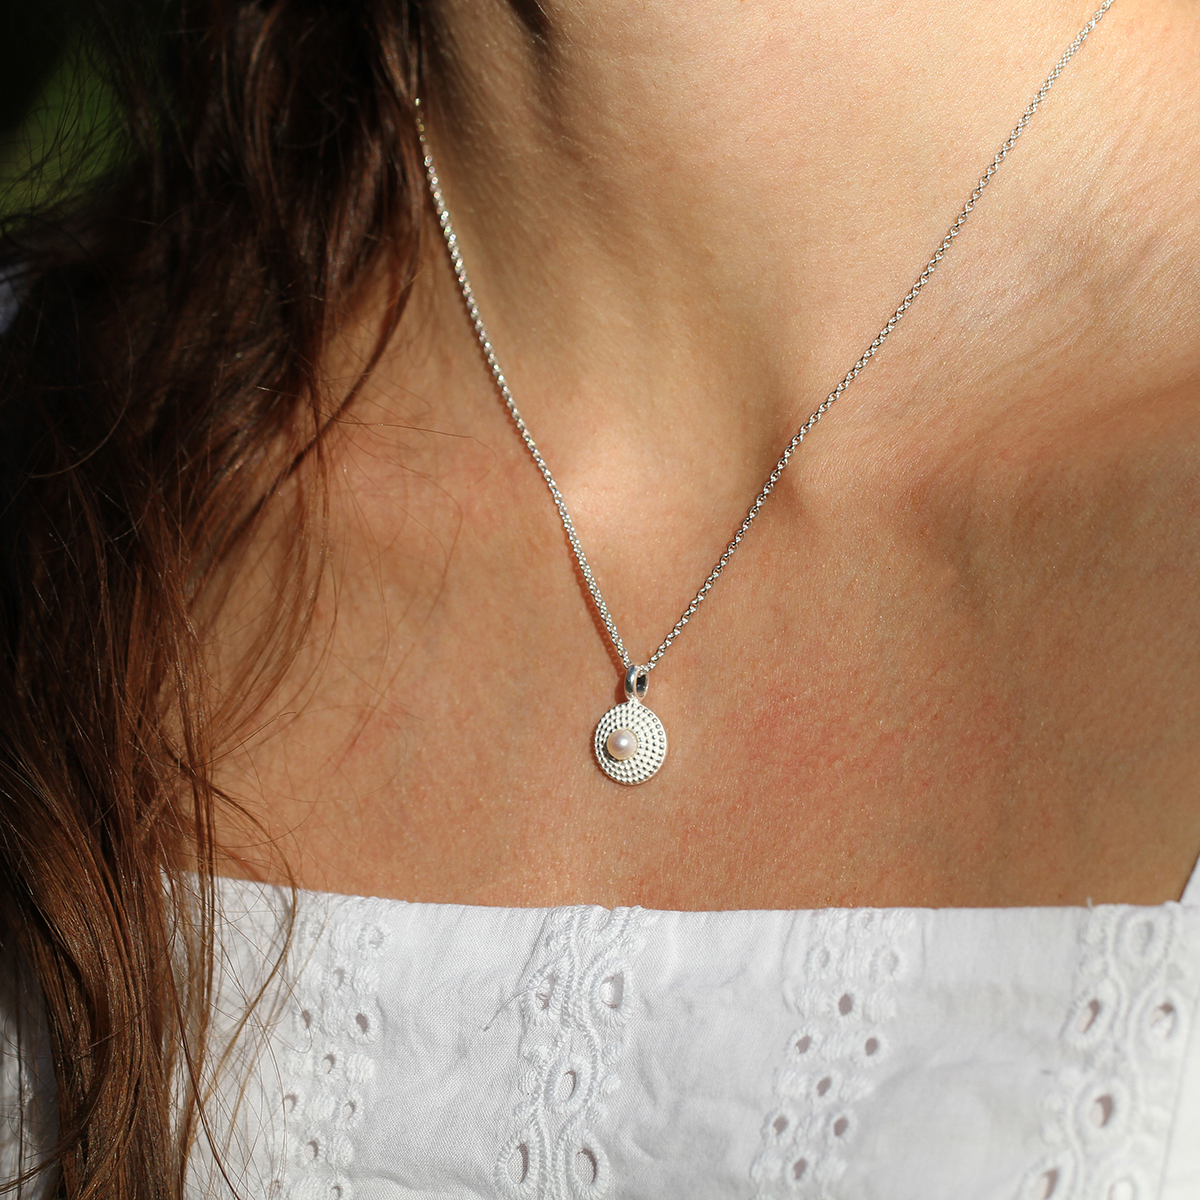 Delicate, circle shaped pendant in sterling silver with a dotted, polished structure and a freshwater pearl sitting at its center.